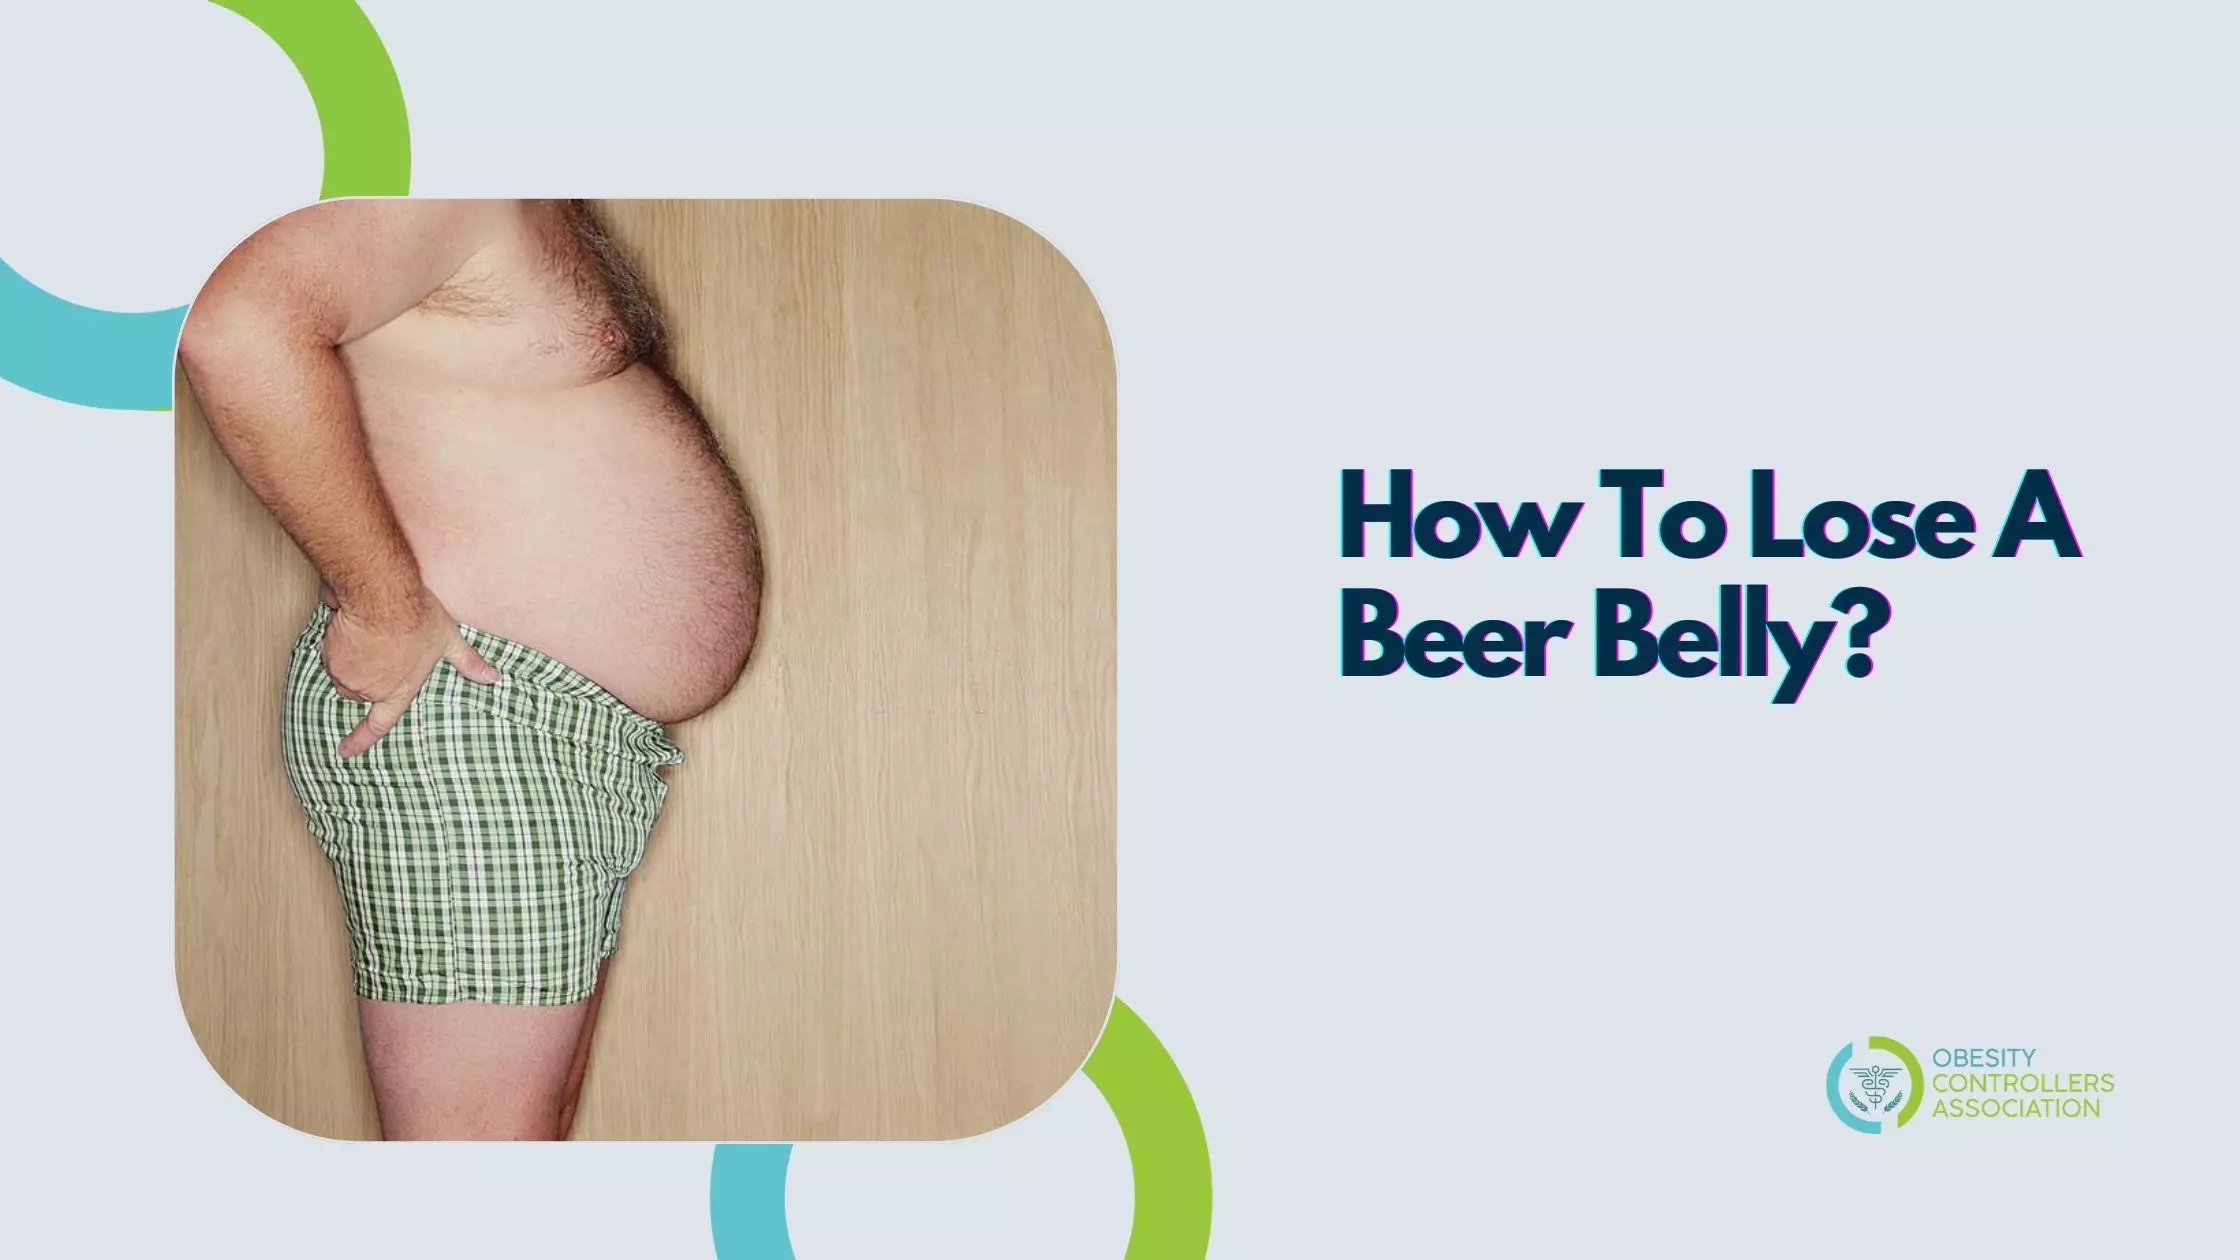 How To Lose A Beer Belly